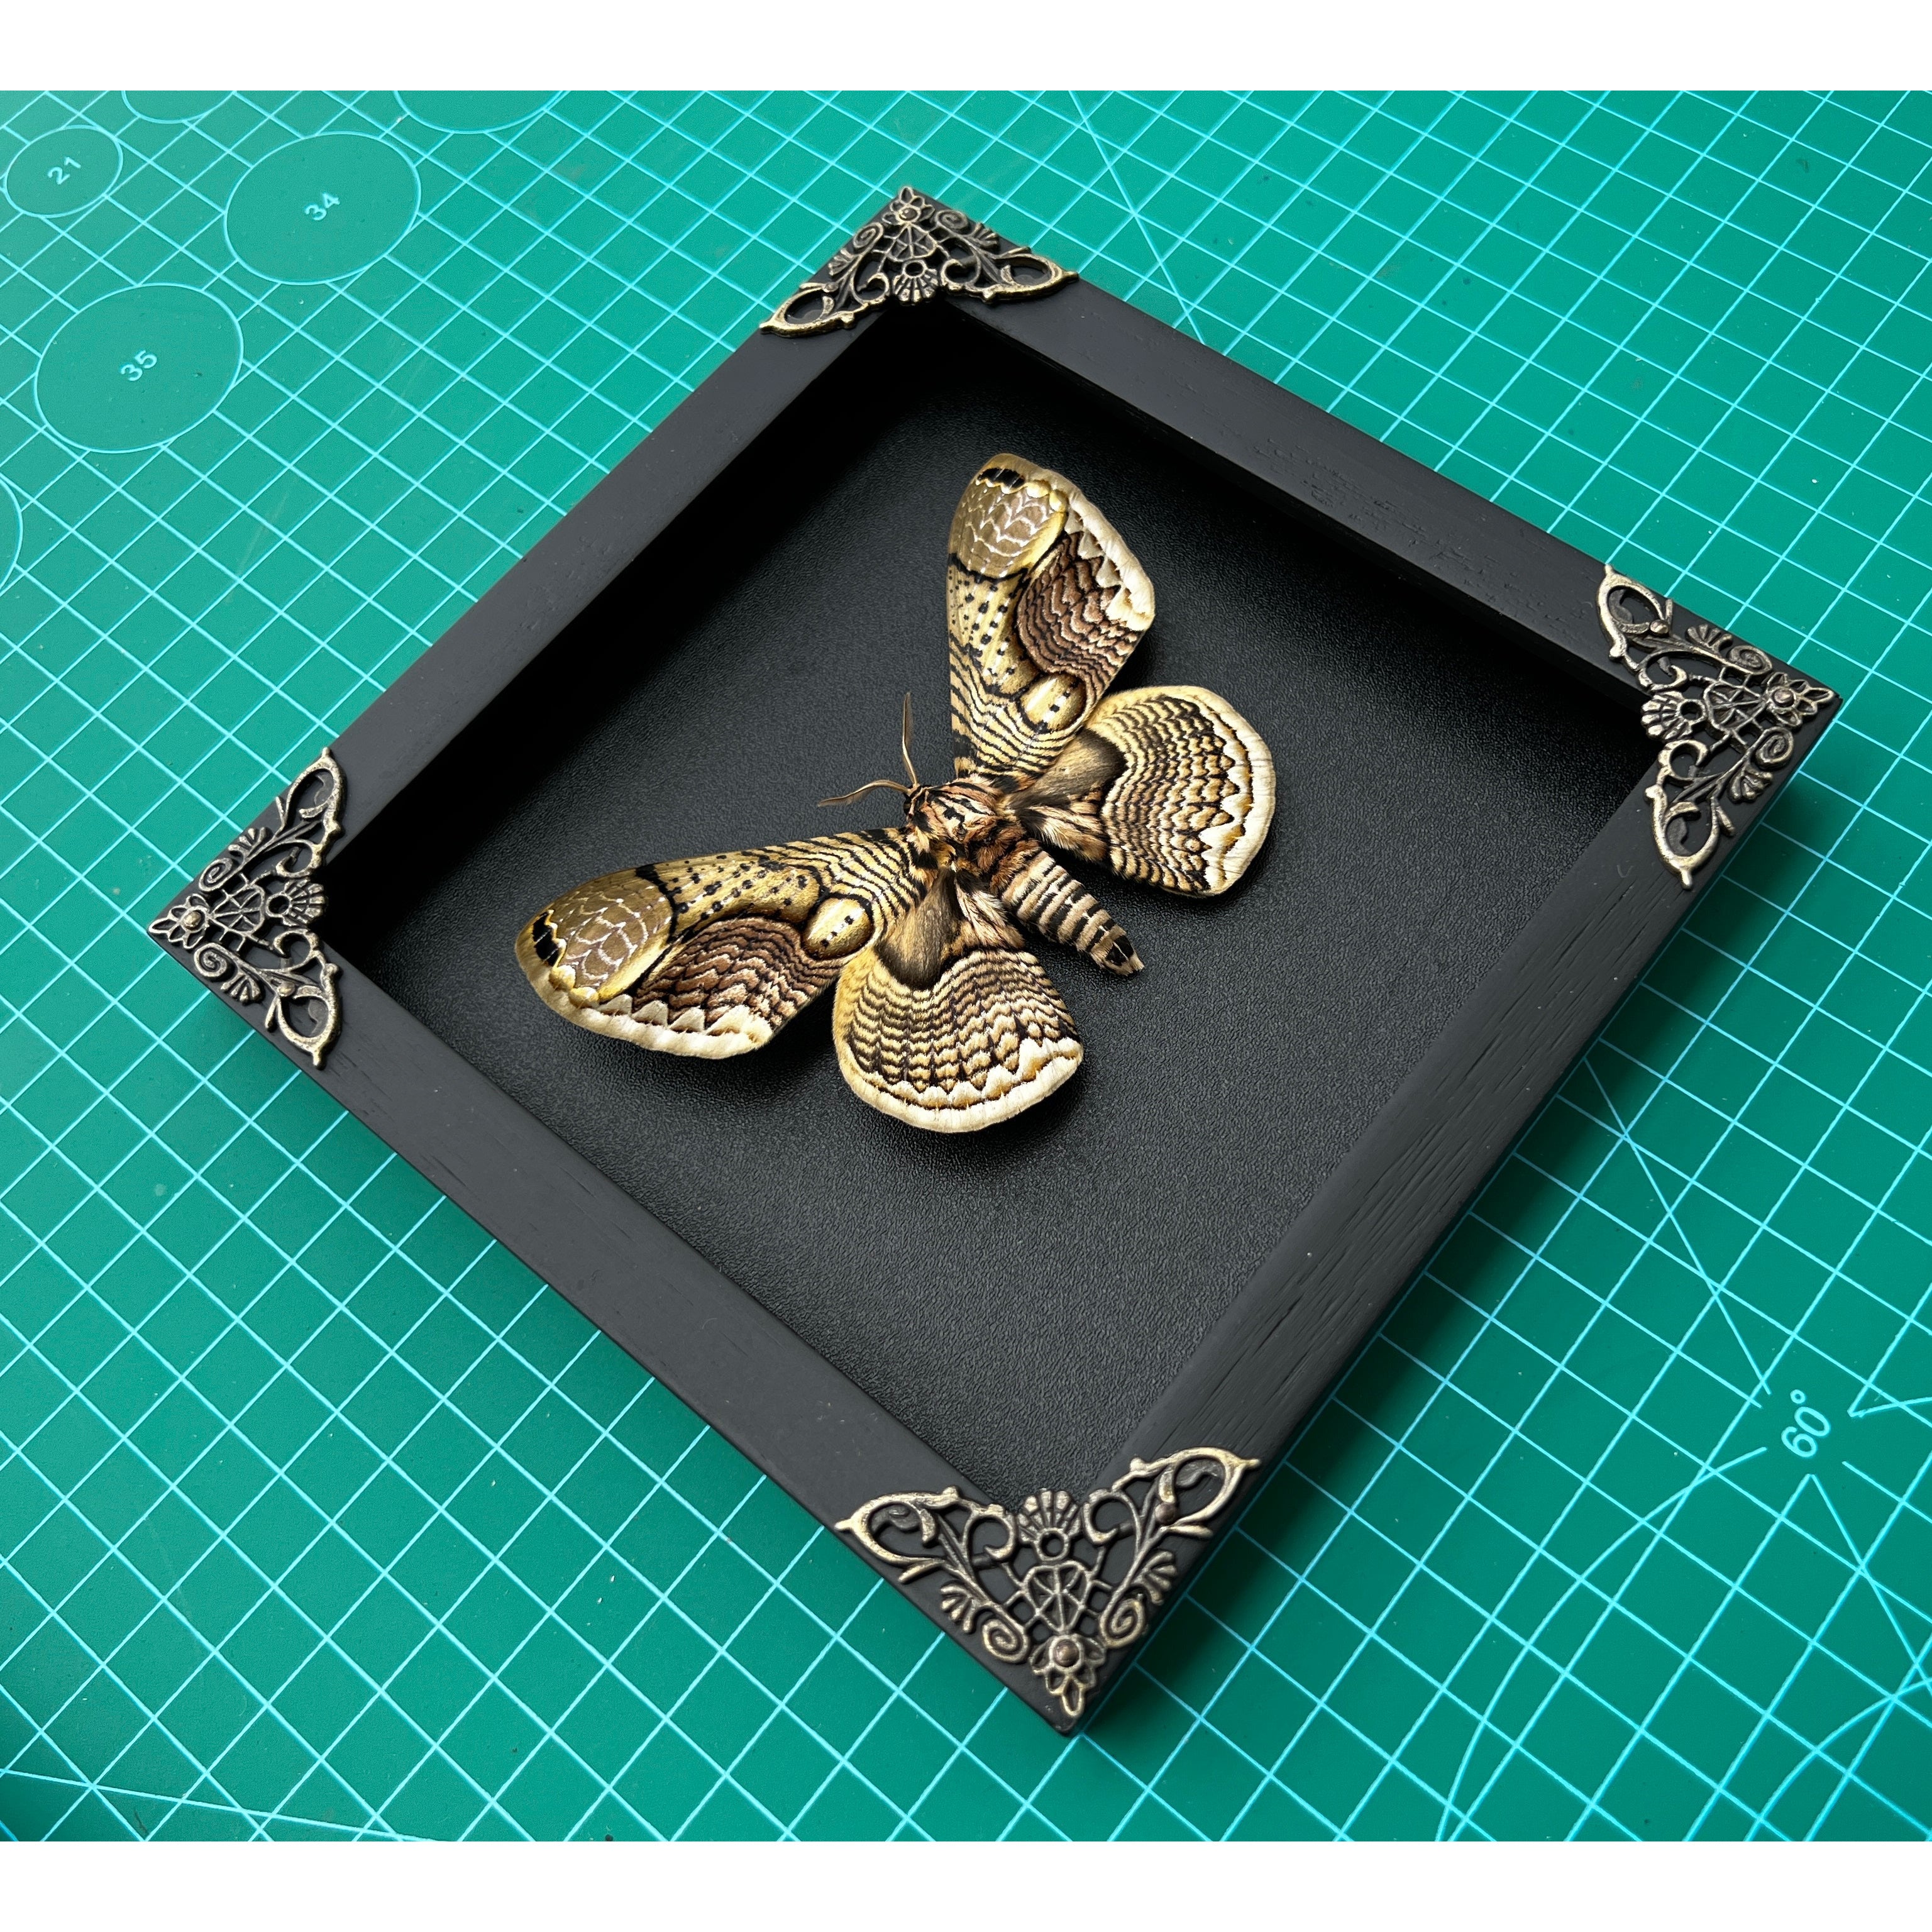 Real Framed Butterfly Black Wooden Shadow Box Dried Brahmin Insect Lover Taxidermy Dead Bug Taxadermy Specimen Display Wall Art Hanging Decoration - Vinacreations